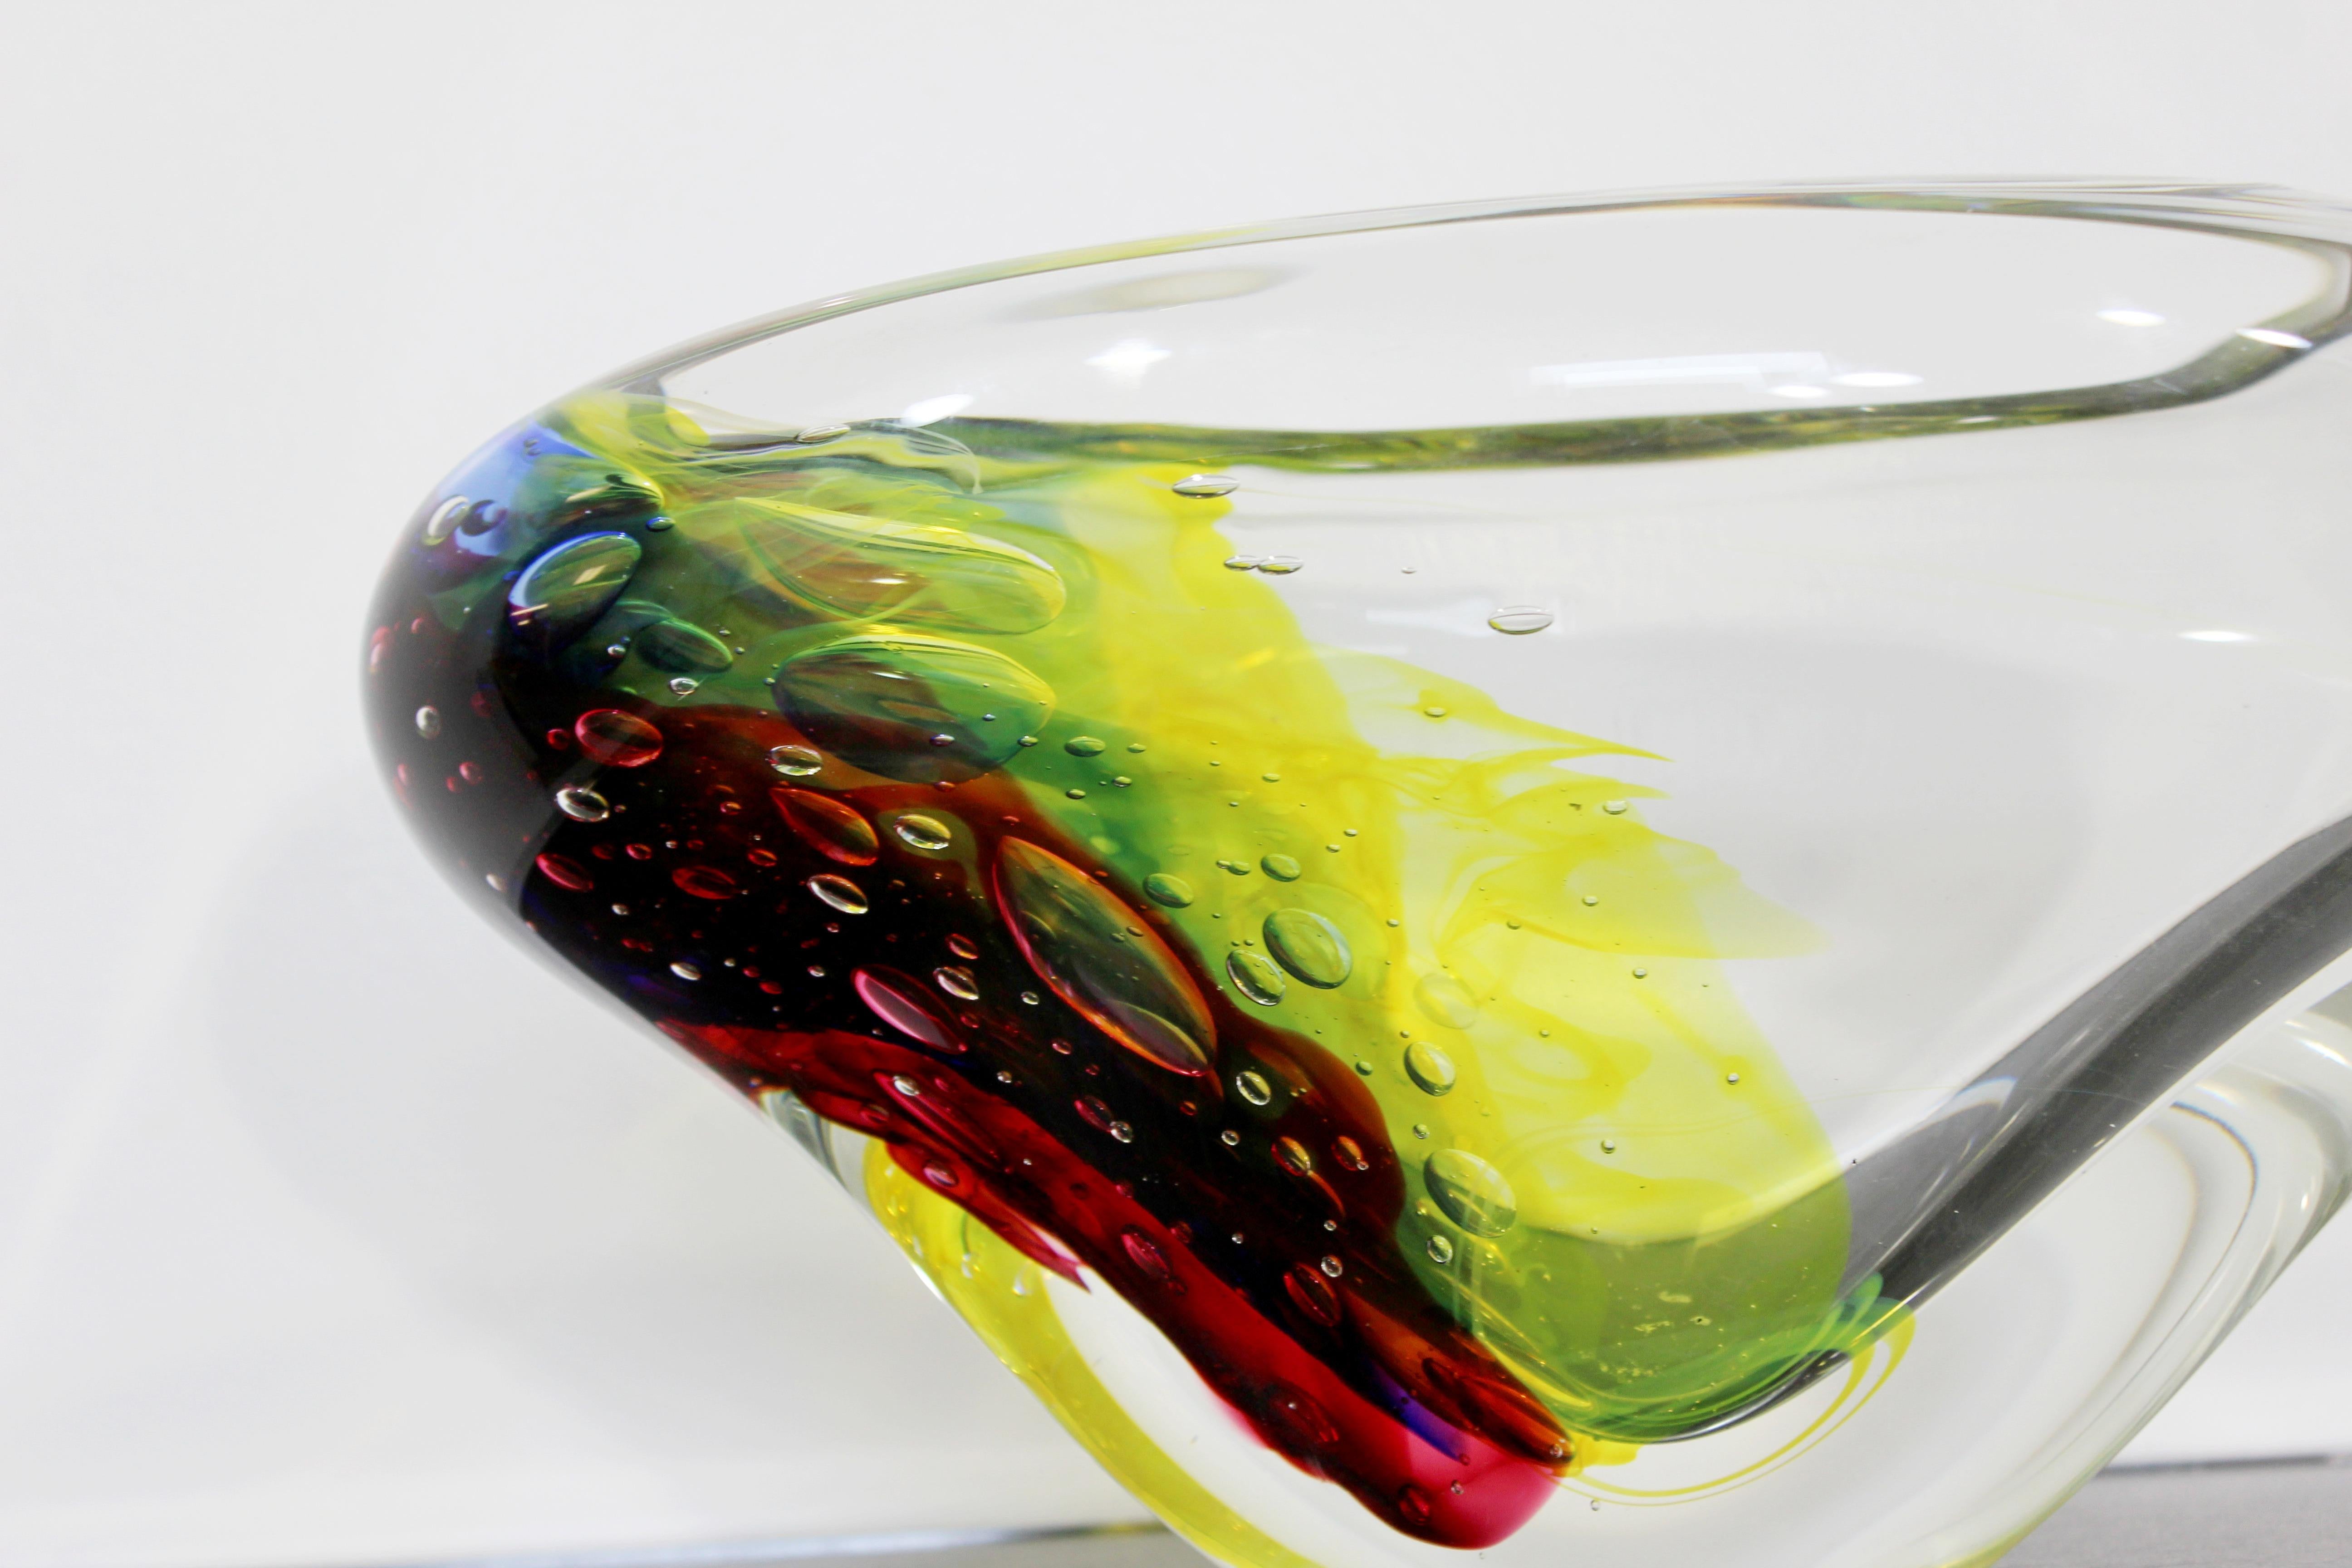 Mid-Century Modern Signed L. Onesto Murano Glass Art Bowl Table Sculpture, Italy 1